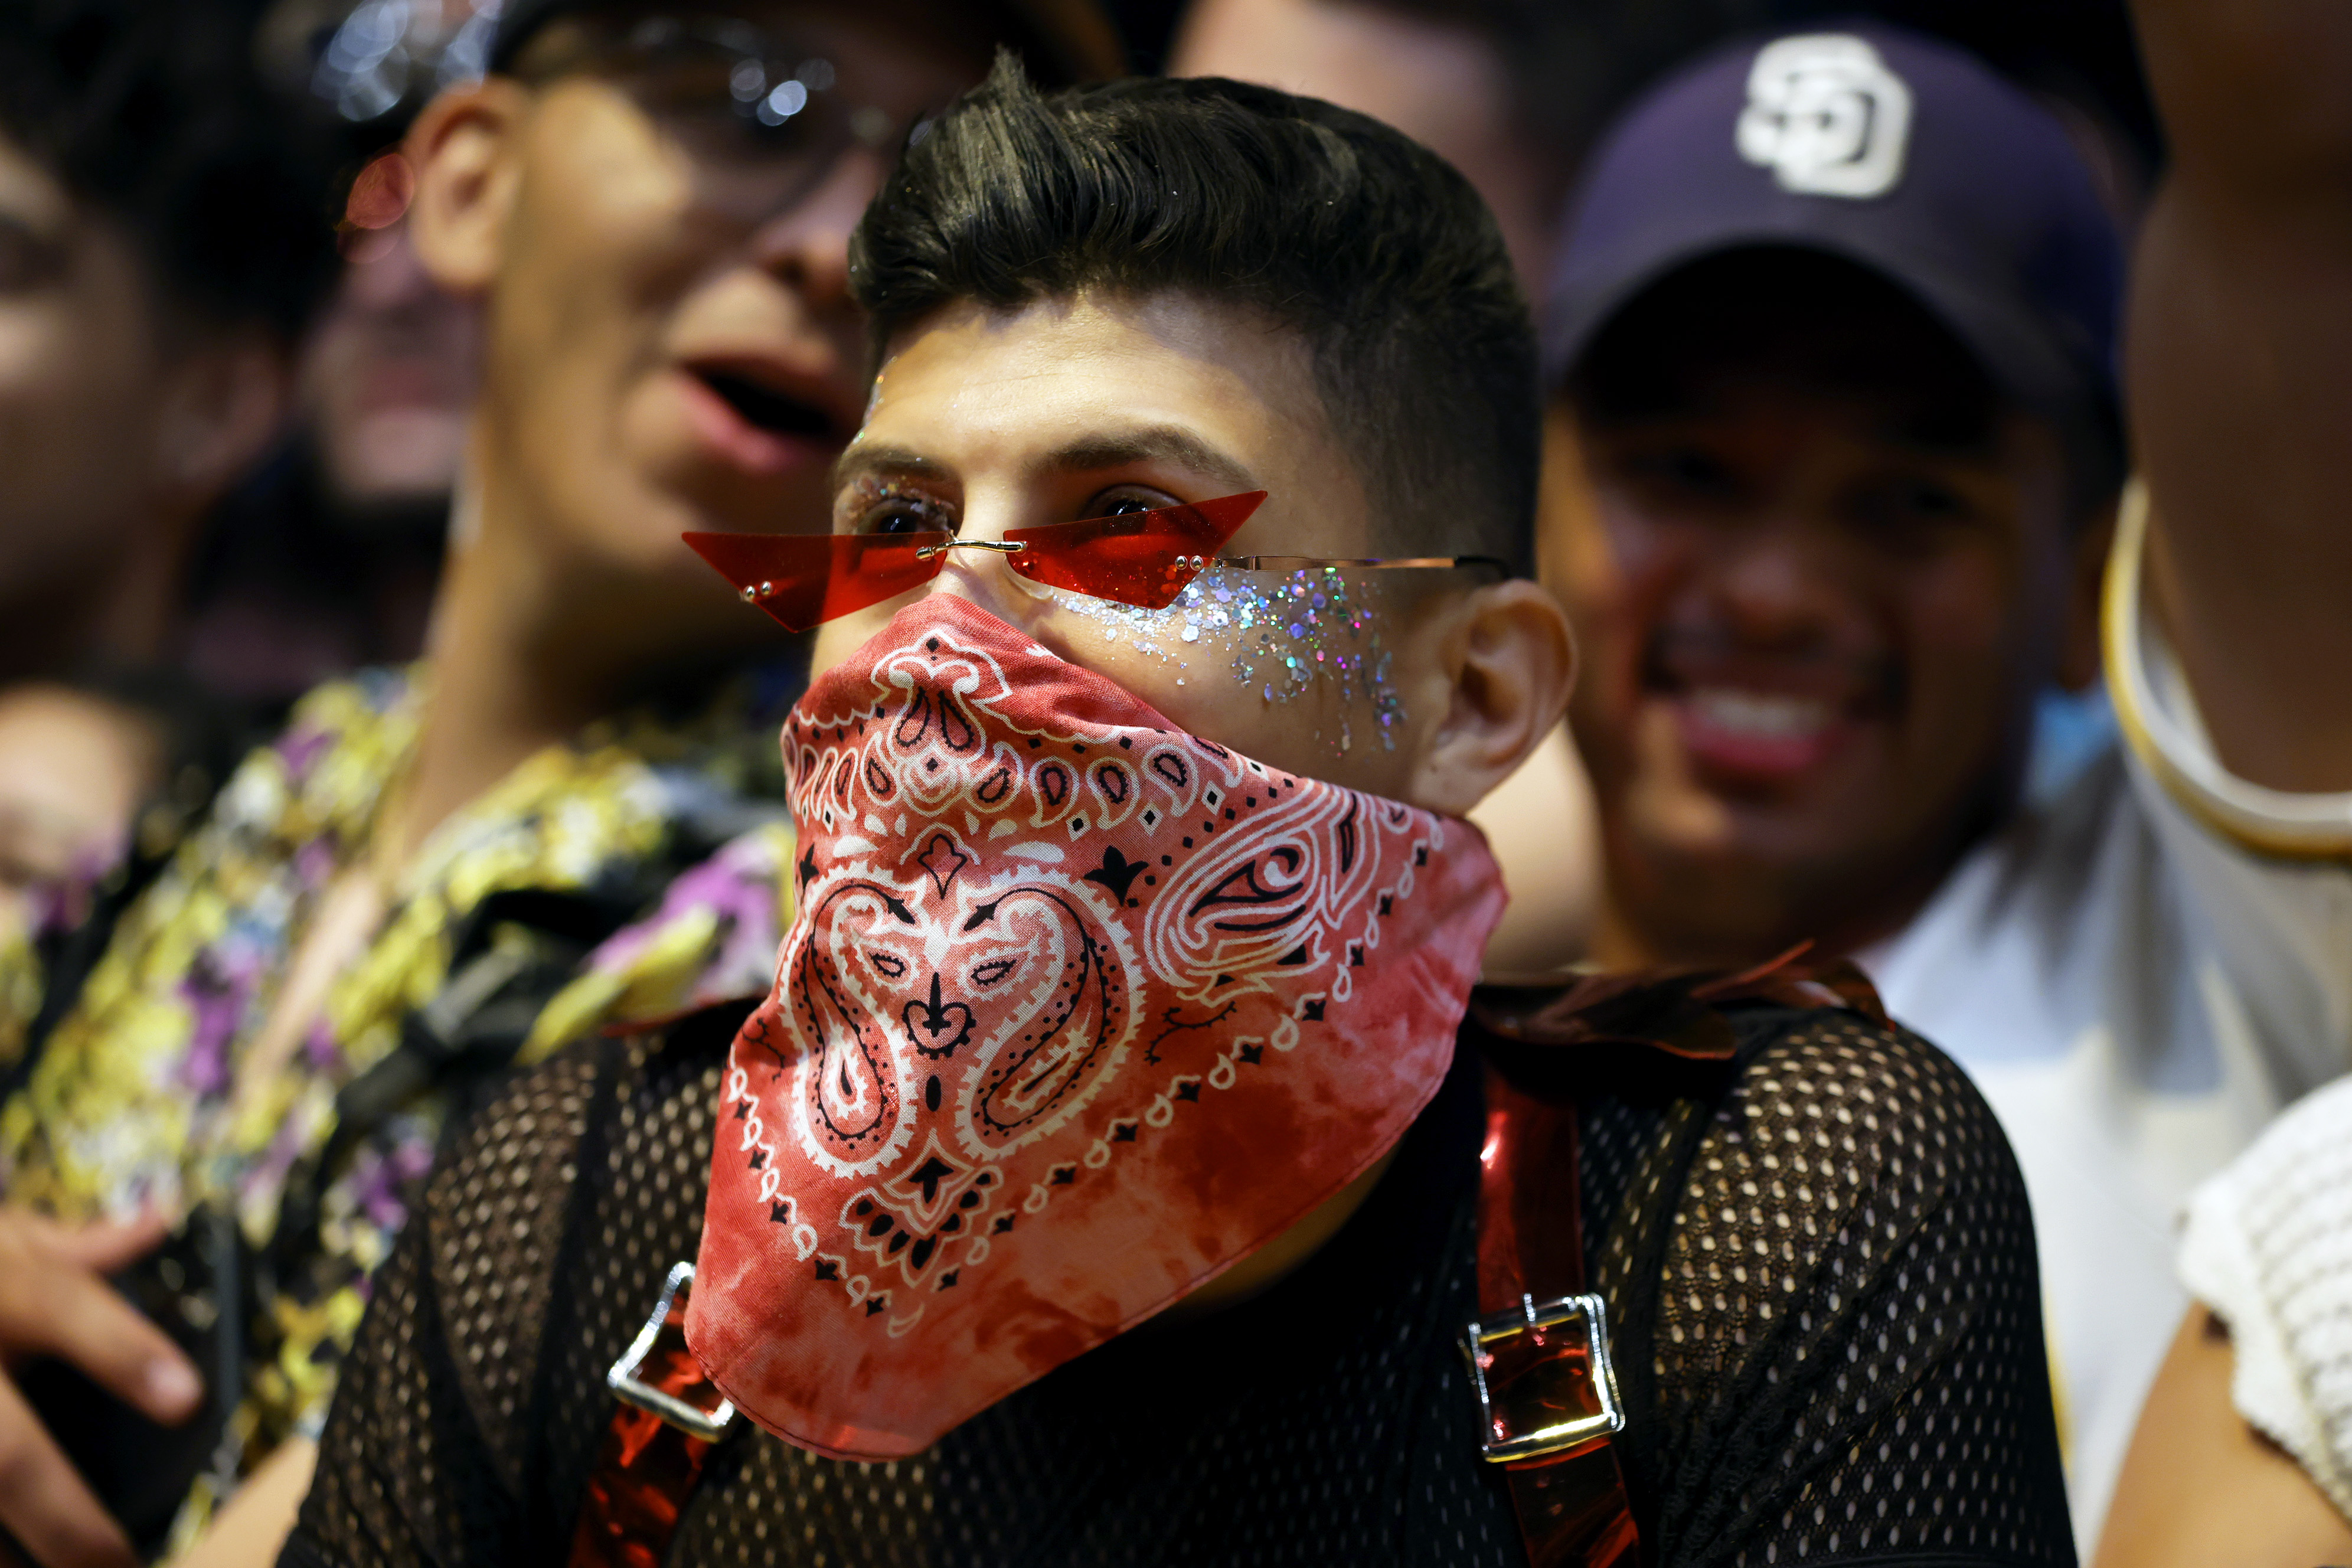 Audiences enjoy Big Sean in makeshift masks during the 2022 Coachella Festival (Photo by Frazer Harrison/Getty Images for Coachella)